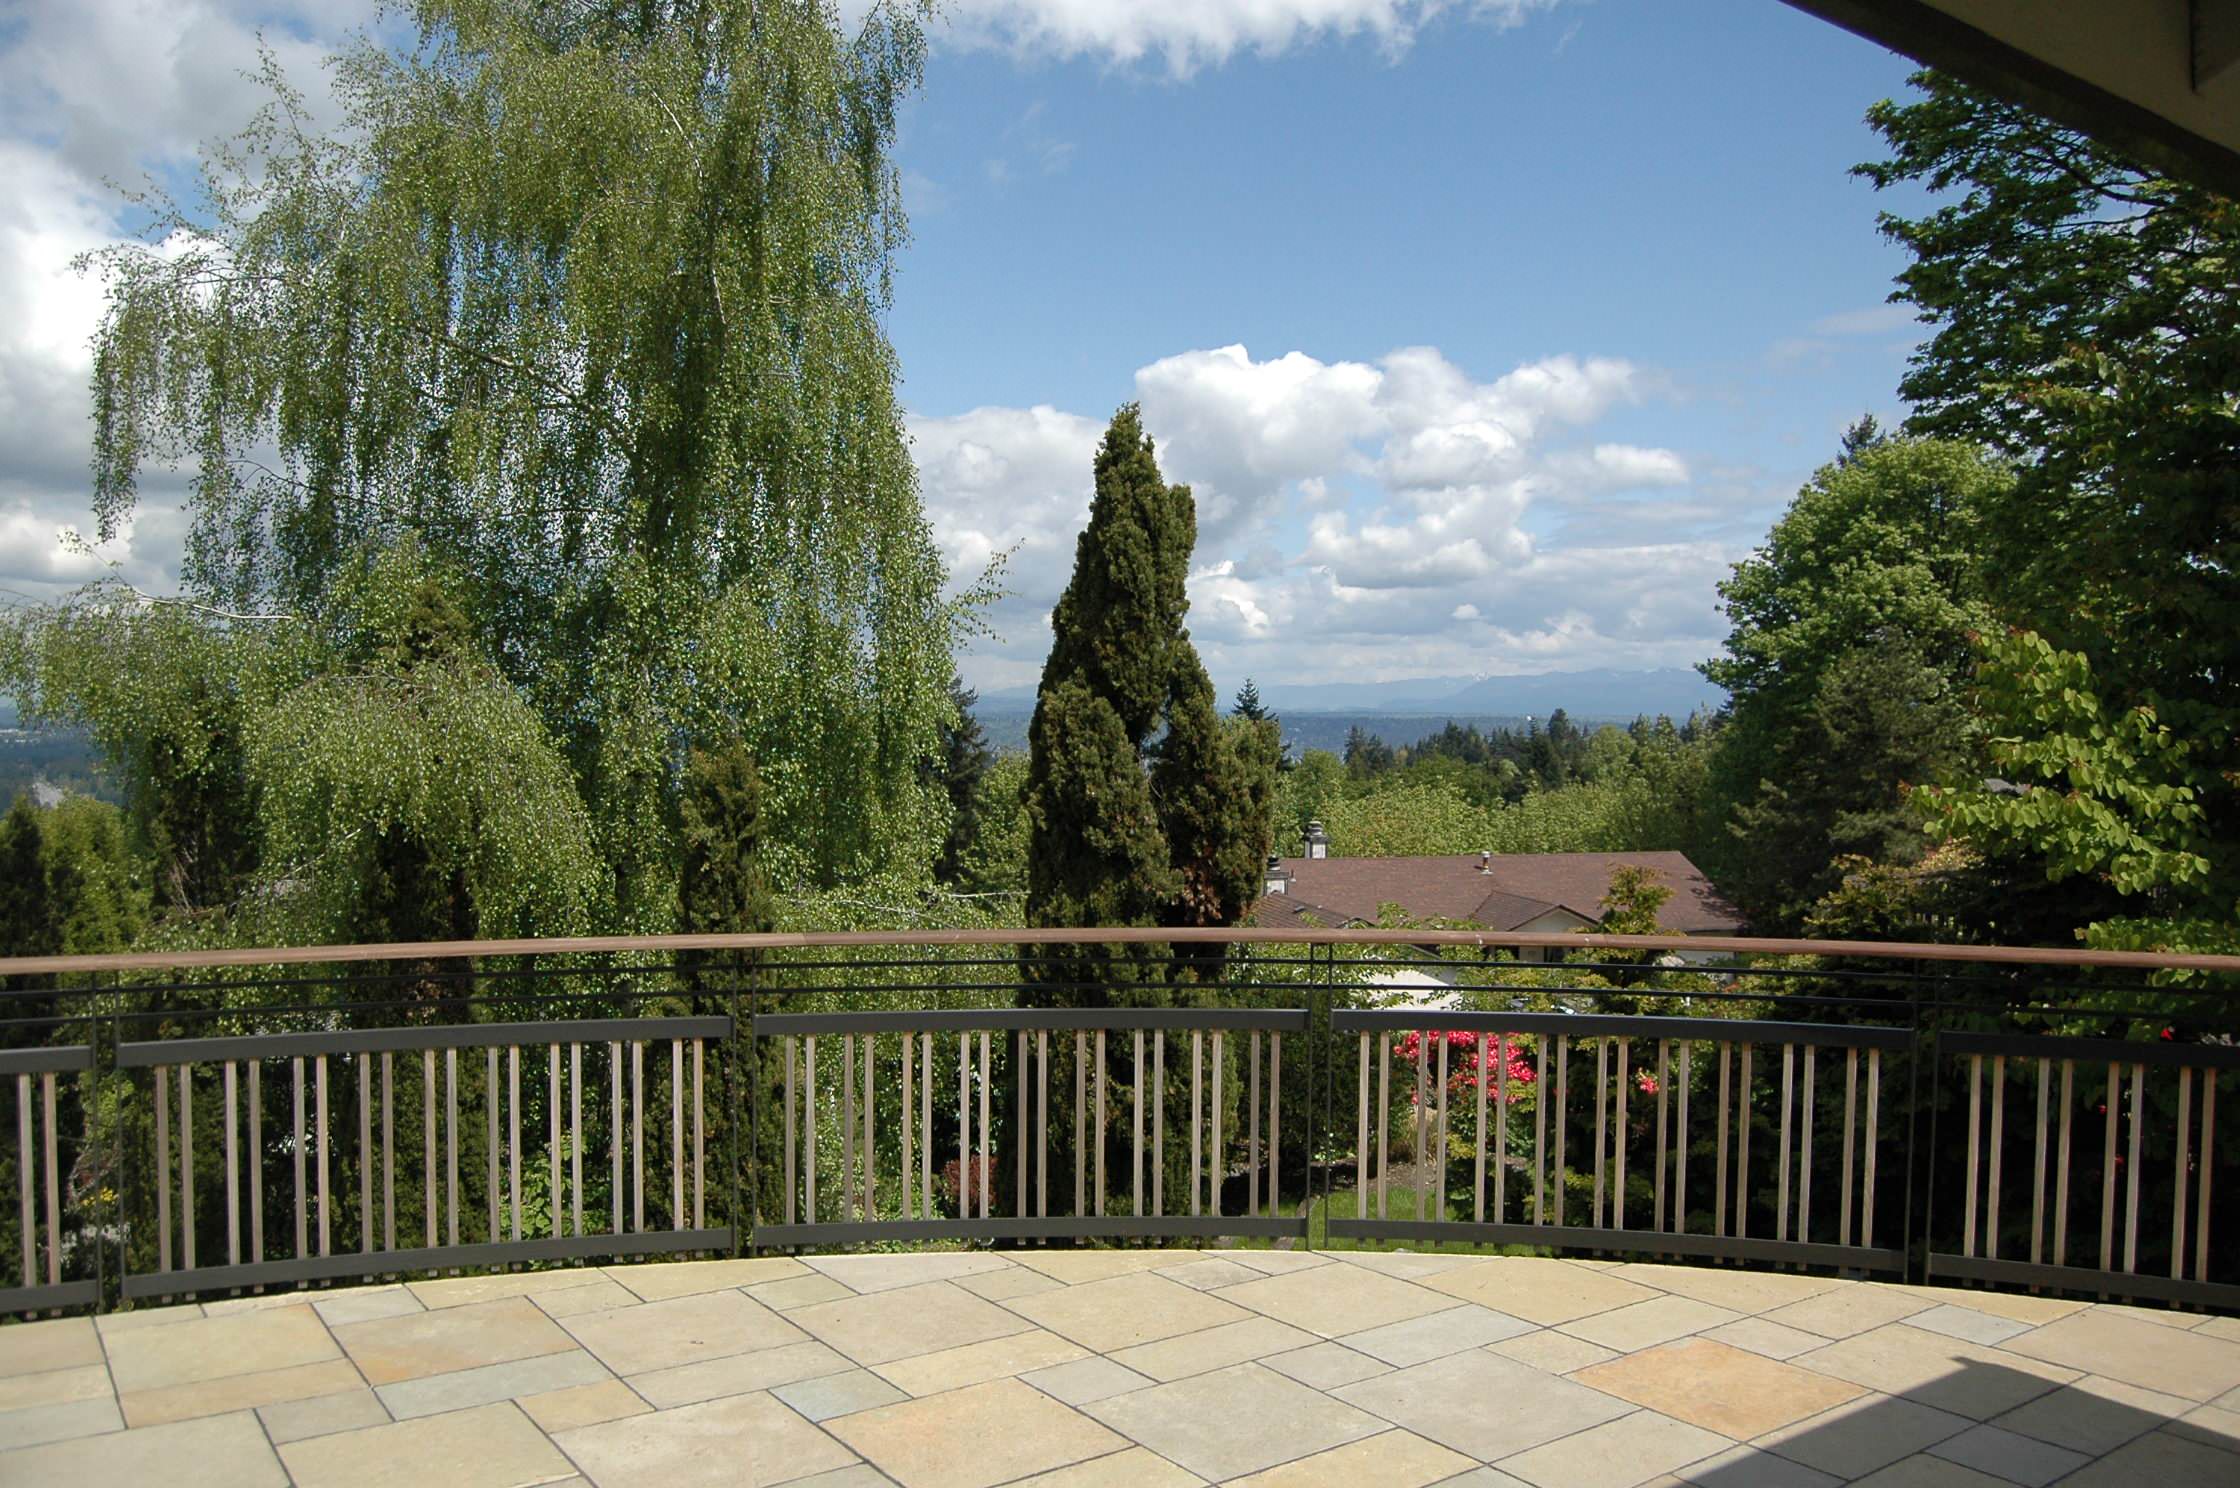 Upper terrace with framed view to the Olympic mountains